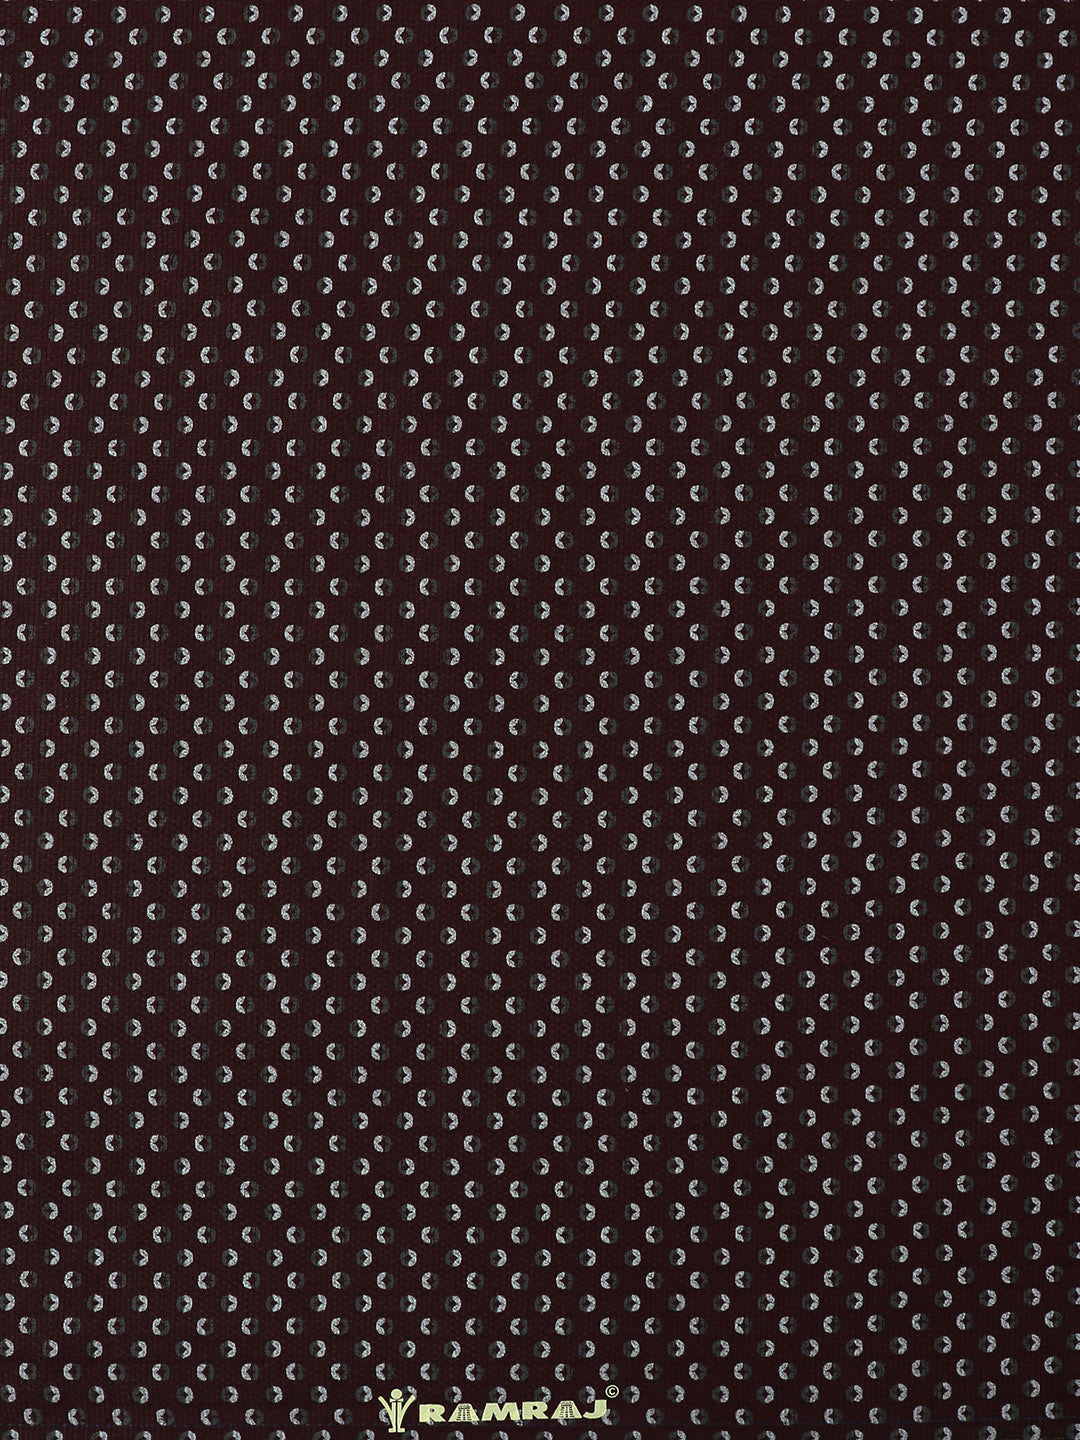 100% Cotton Maroon Over All Printed Shirt Fabric Alpha -Zoom view